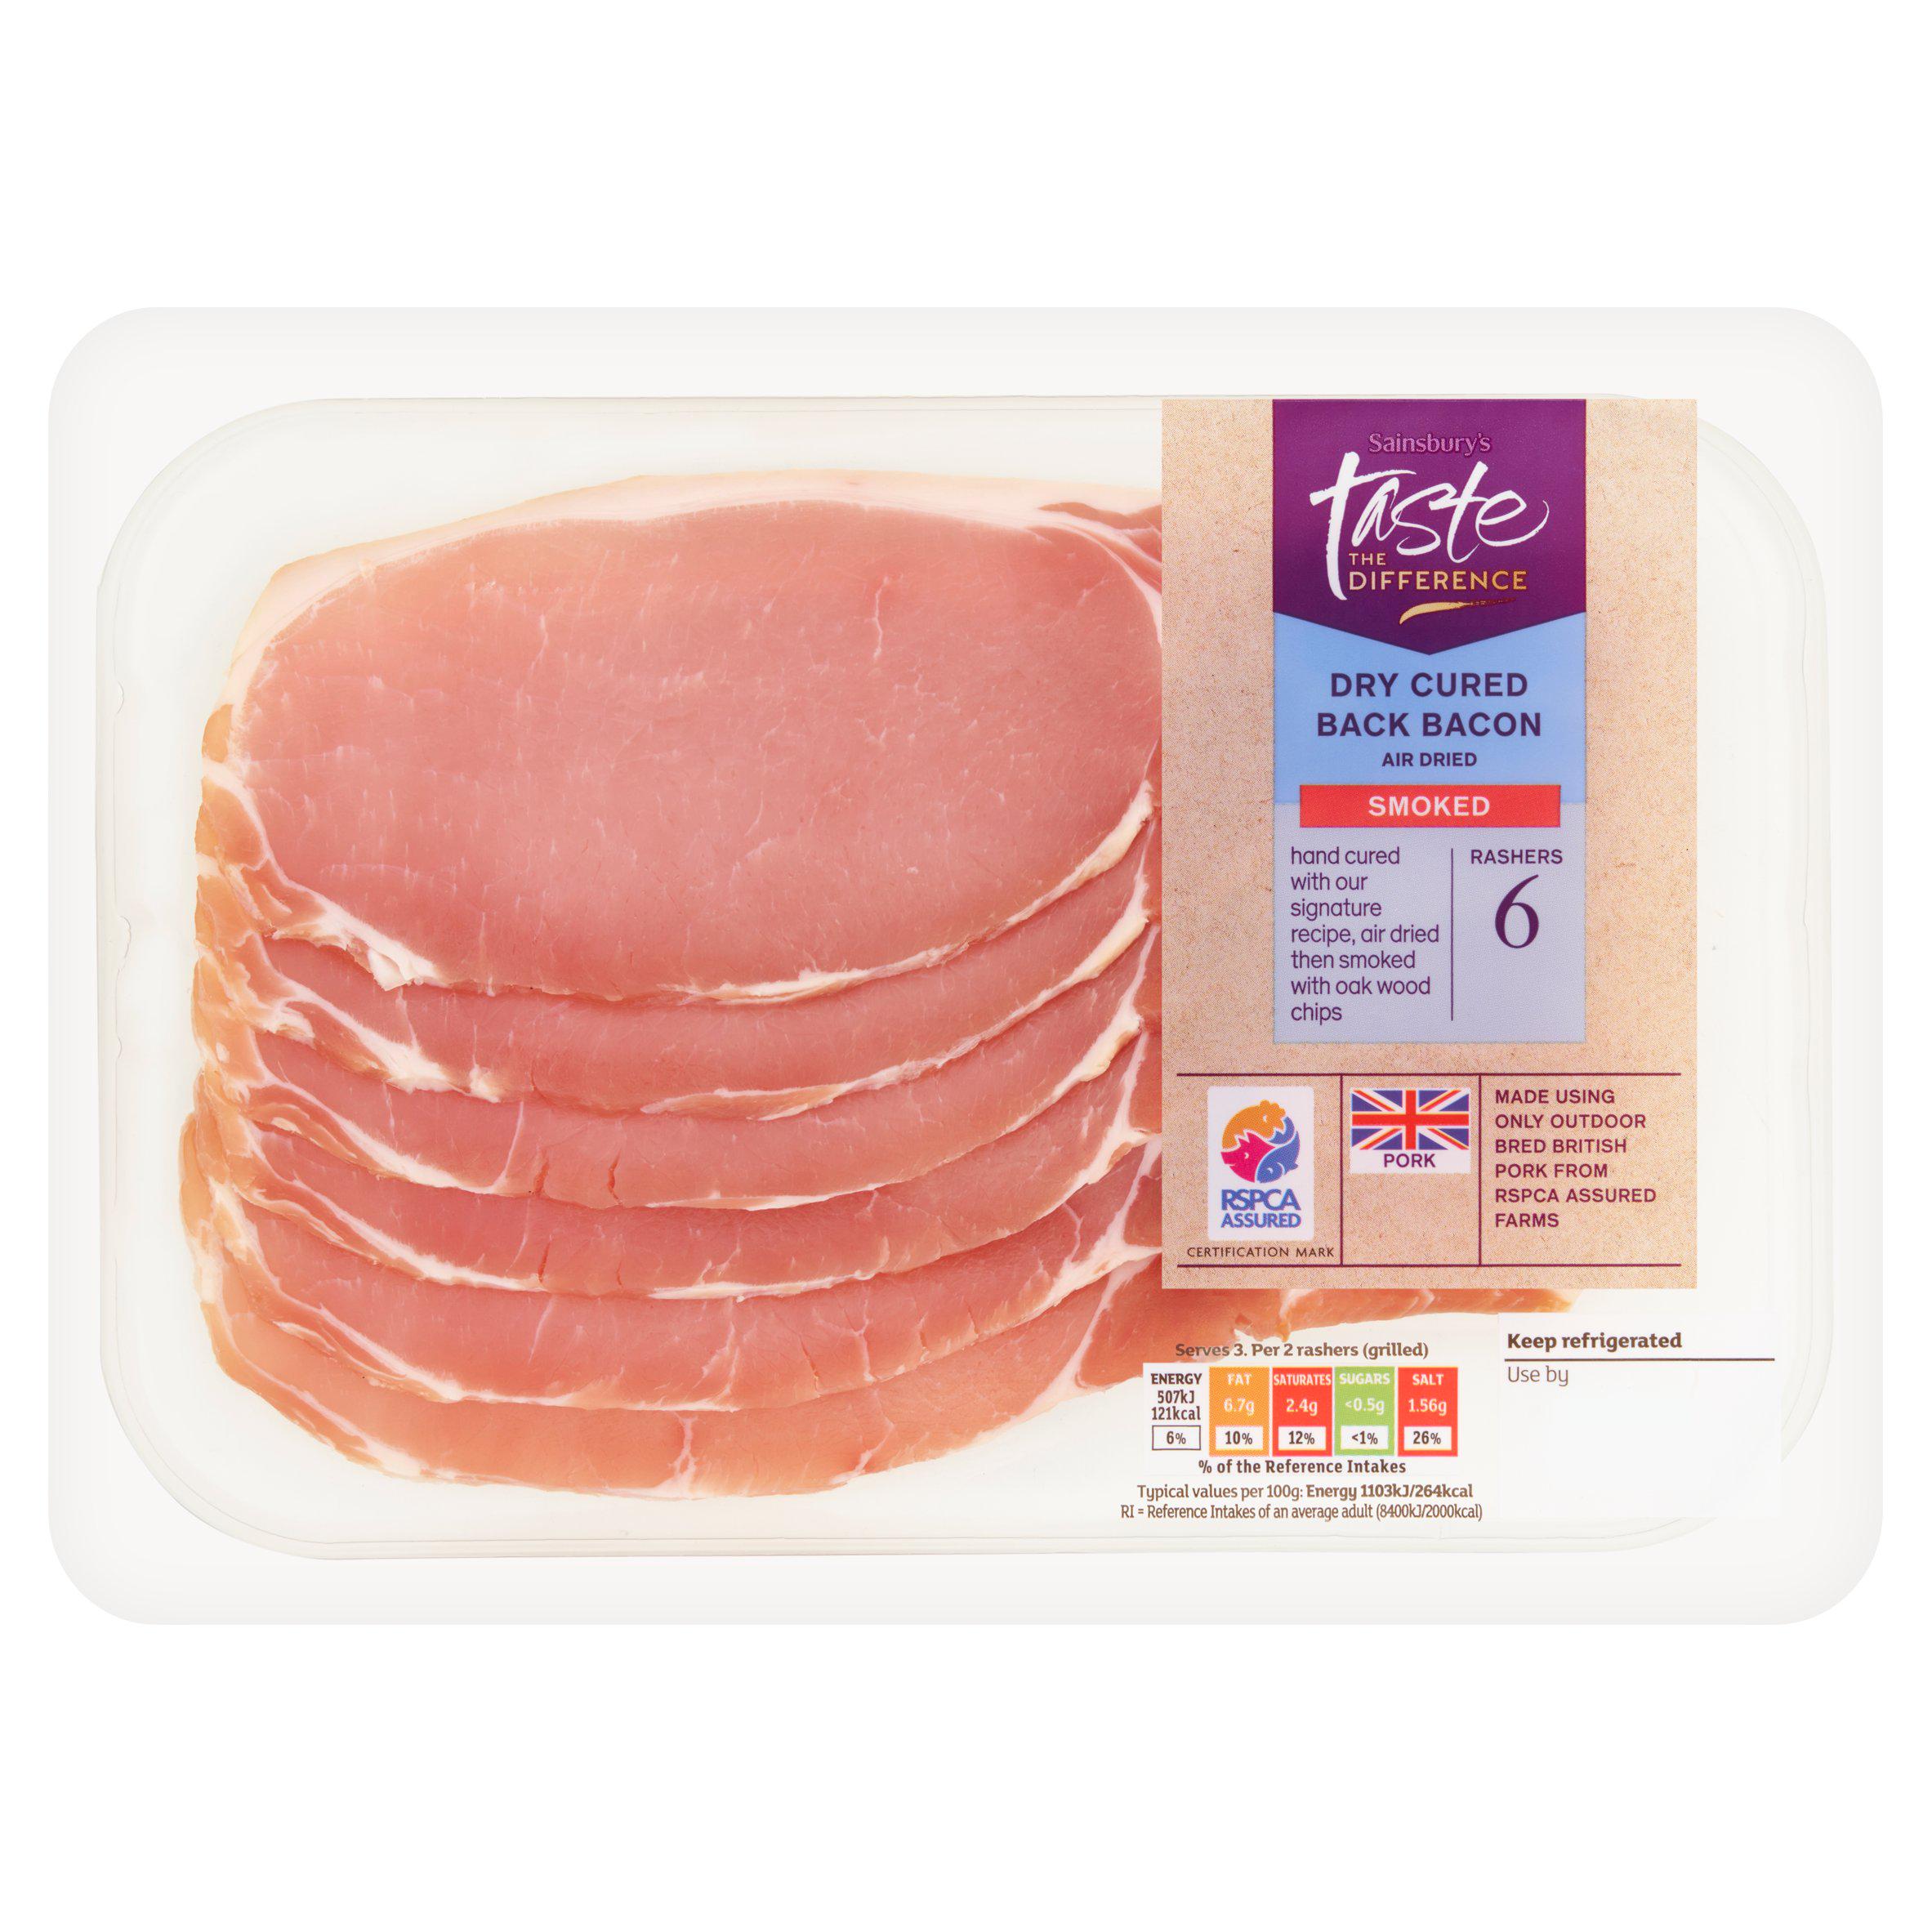 Sainsbury's Smoked Air Dried Dry Cured Back Bacon Rashers, Taste the Difference x6 220g